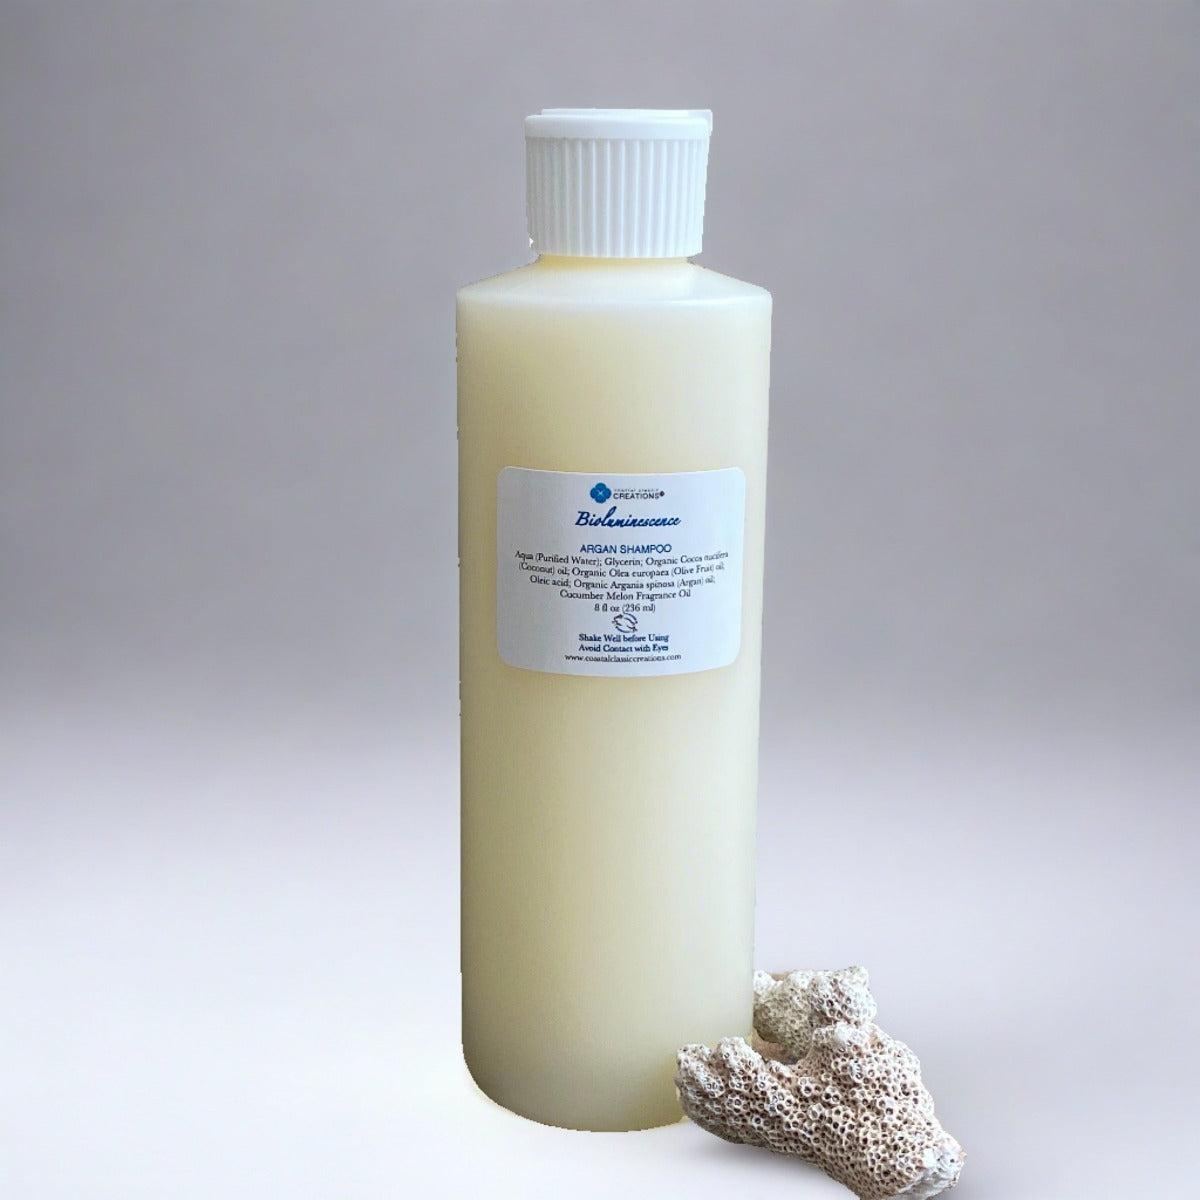 Bioluminescence Argan Facial Wash: An 8 oz  bottle with a white flip cap containing a fragrance-free, plant-based cleanser. The label showcases its natural ingredients, promising a gentle yet effective cleansing experience